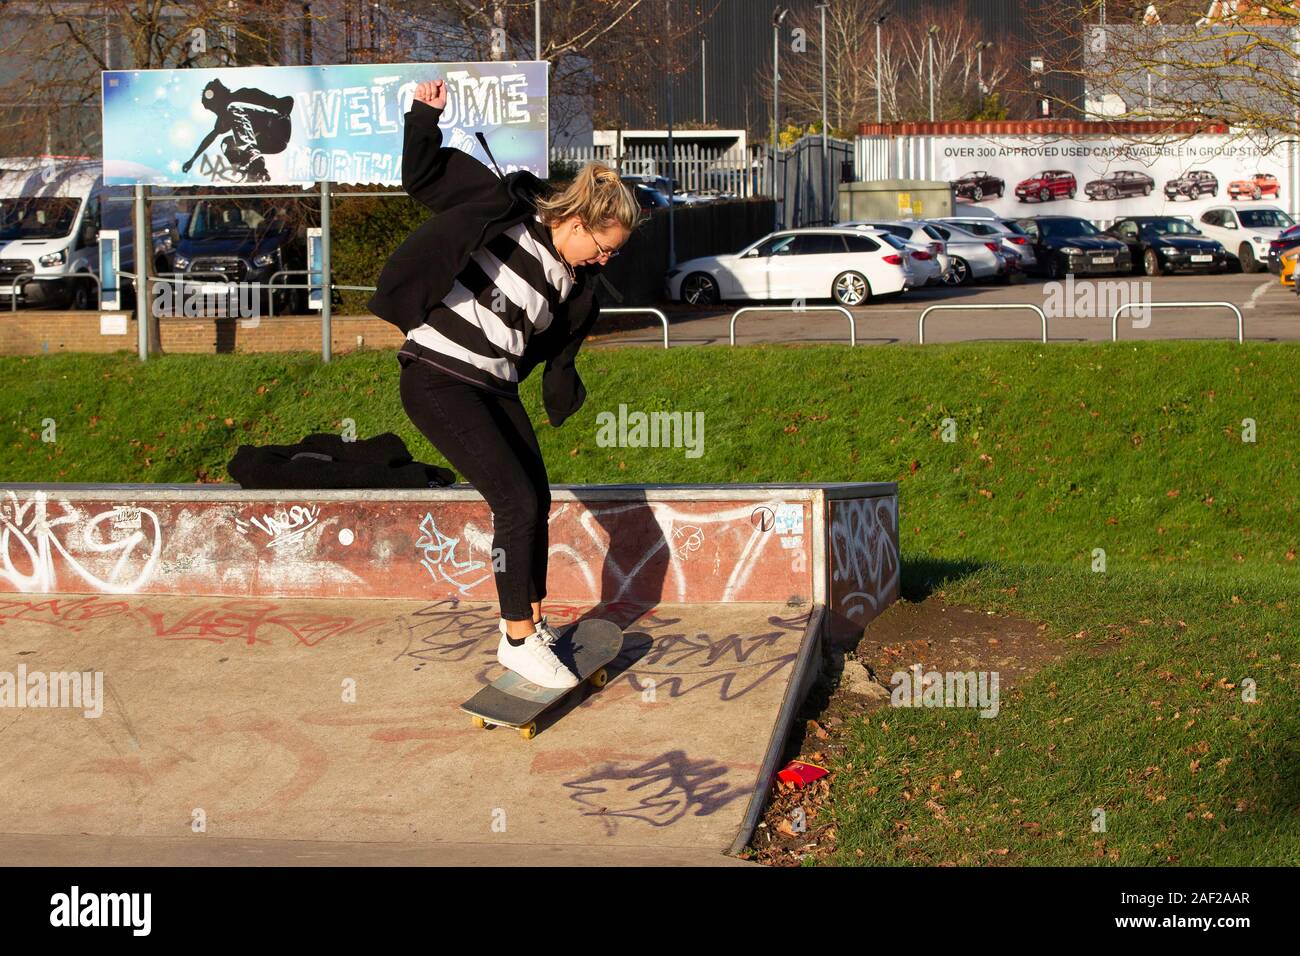 Young female boarding Radlands Skate Park, Mid Summer Meadow, Northampton, UK. Stock Photo